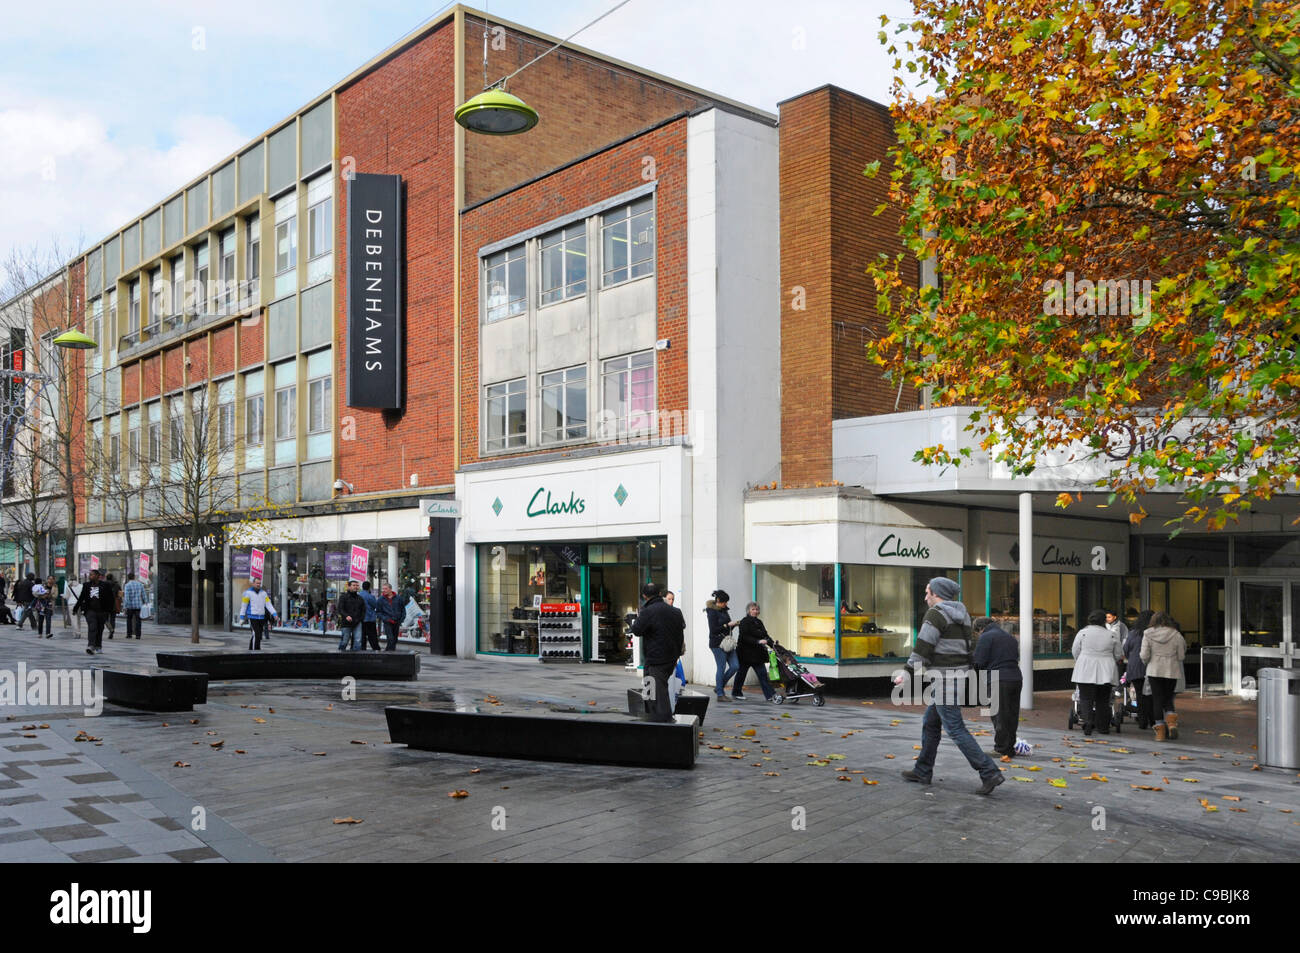 Autumn trees in town centre street scene & shopping High Street Debenhams department store & Clarks shoes shop front window in Slough Berkshire UK Stock Photo